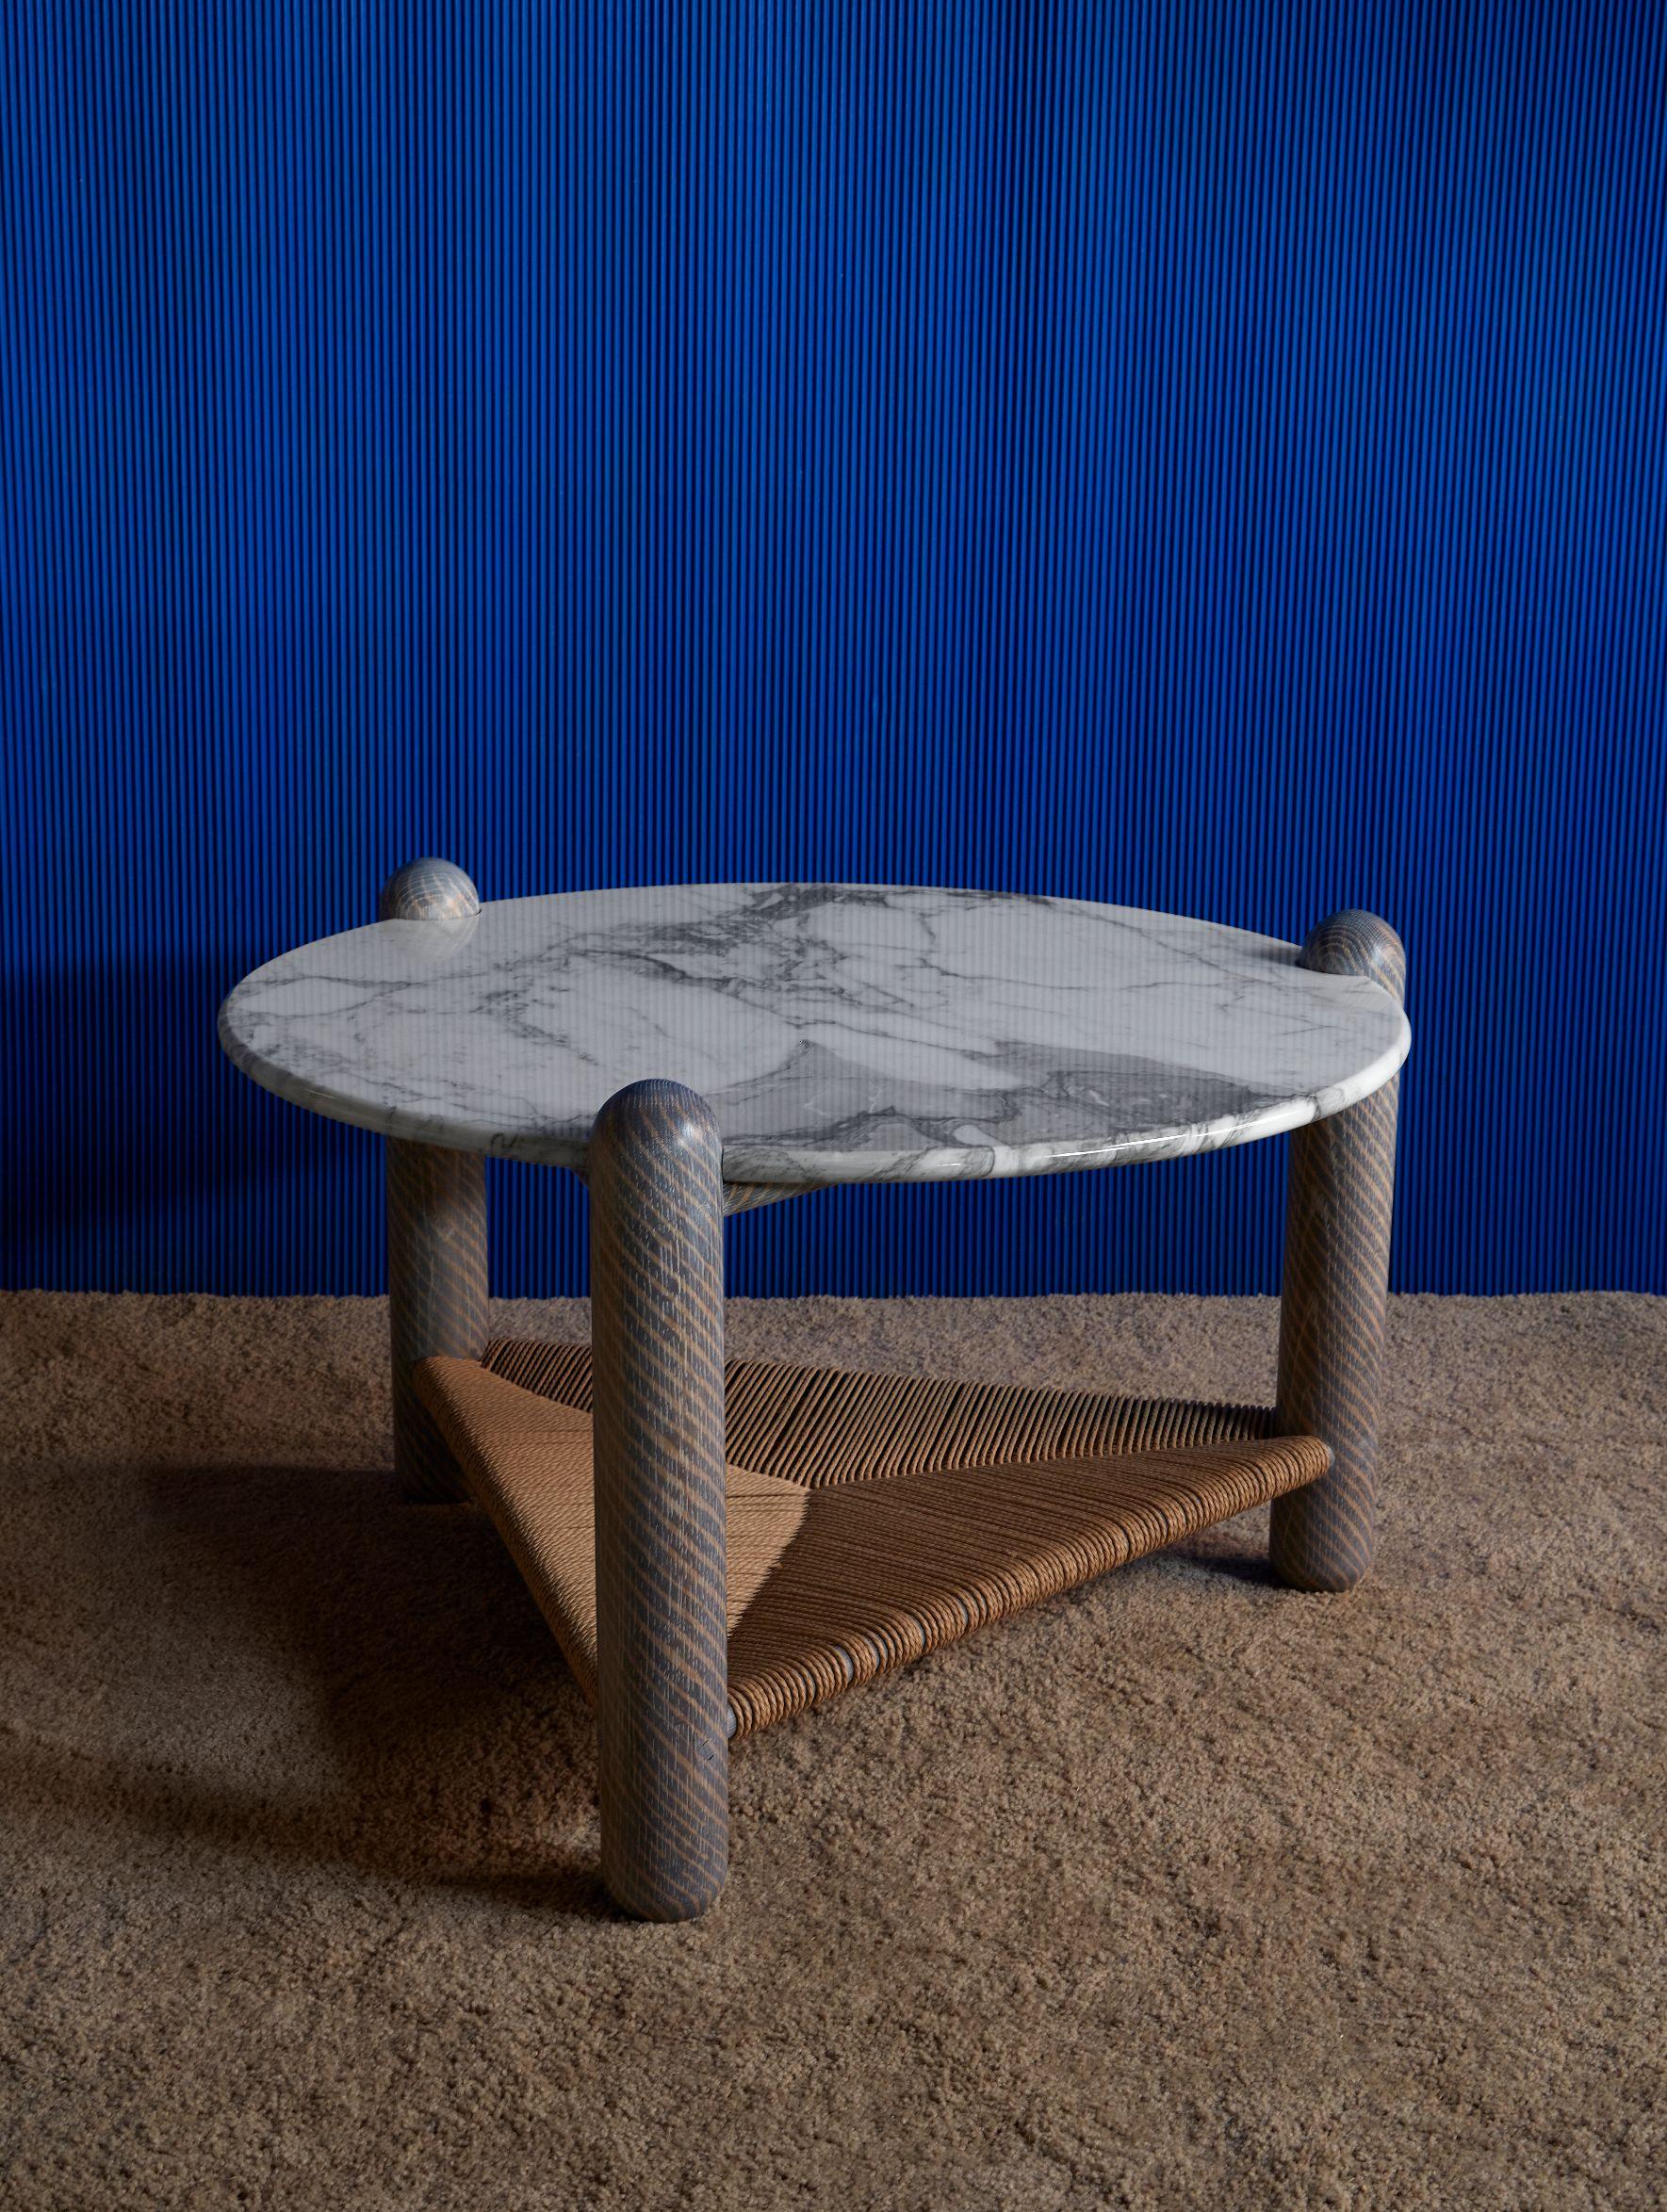 Captain's coffee table by Hamilton Holmes
Oxalino Collection 
2020
Dimensions: D 76.2, W 76.2, H 45.8 cm
Materials: White oak, Calcatta marble, natural Danish cord, and oxidized treatment

These solid oak three-legged tables feature handwoven